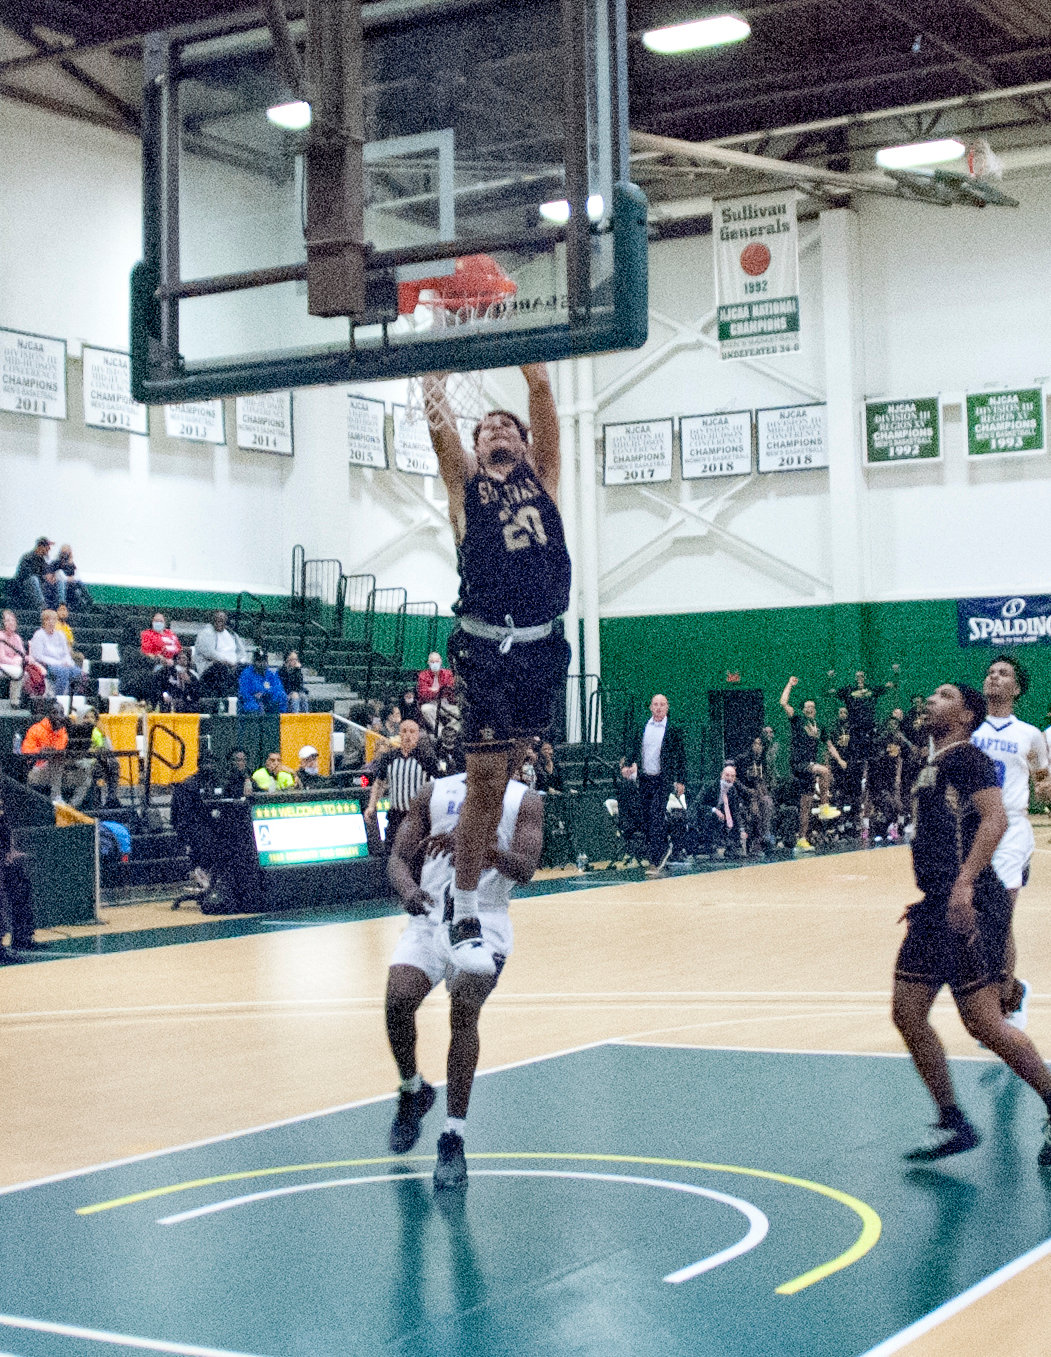 Jay Alvarez gets up and slams home a dunk on a fast break. The Generals won their season opener 80-55.